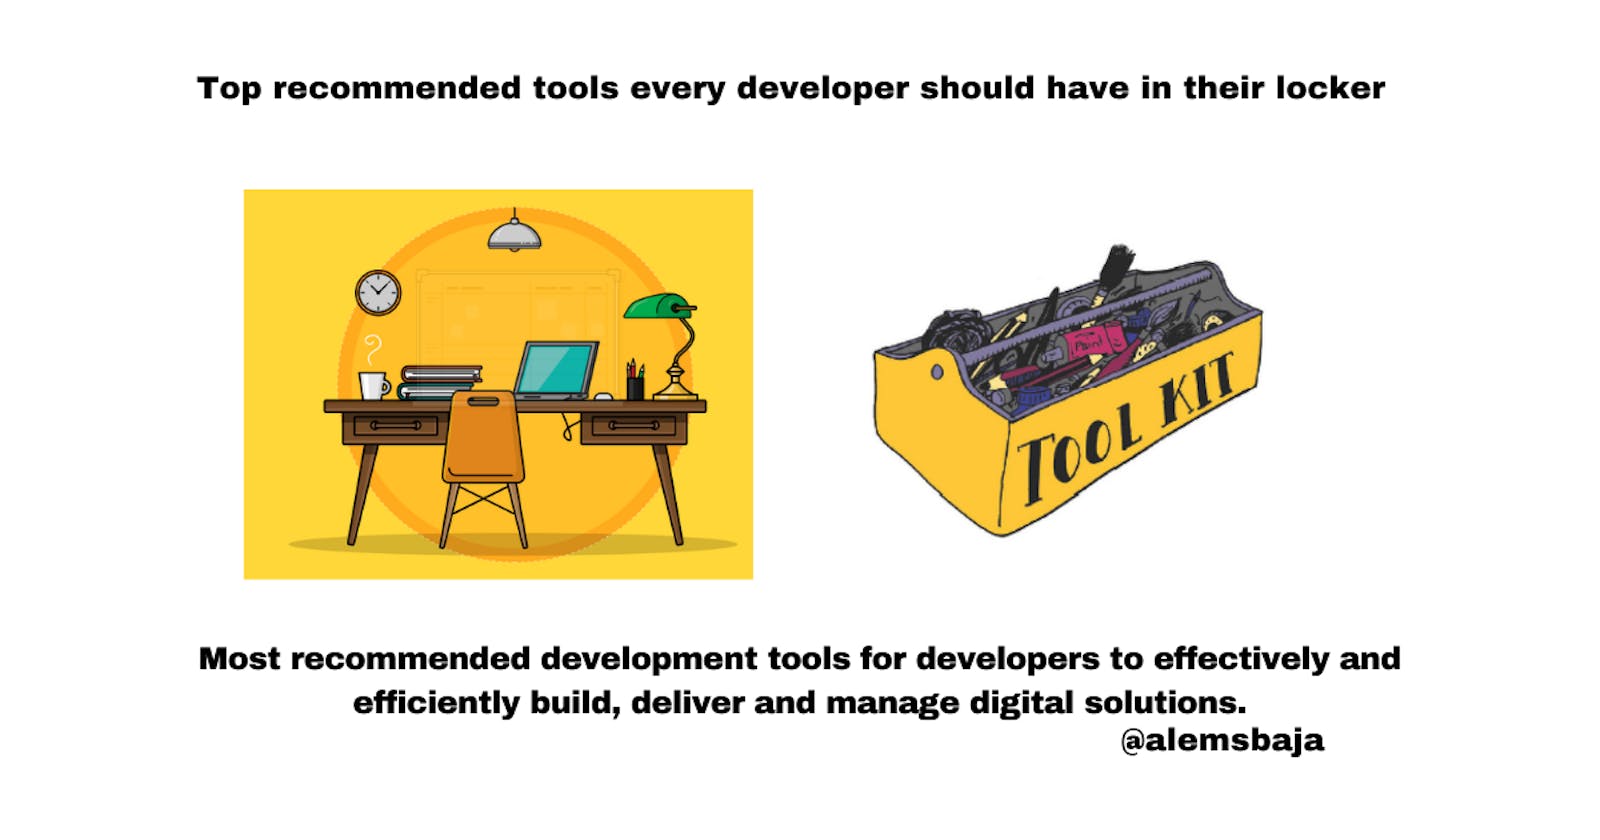 Top recommended tools every developer should have in their locker